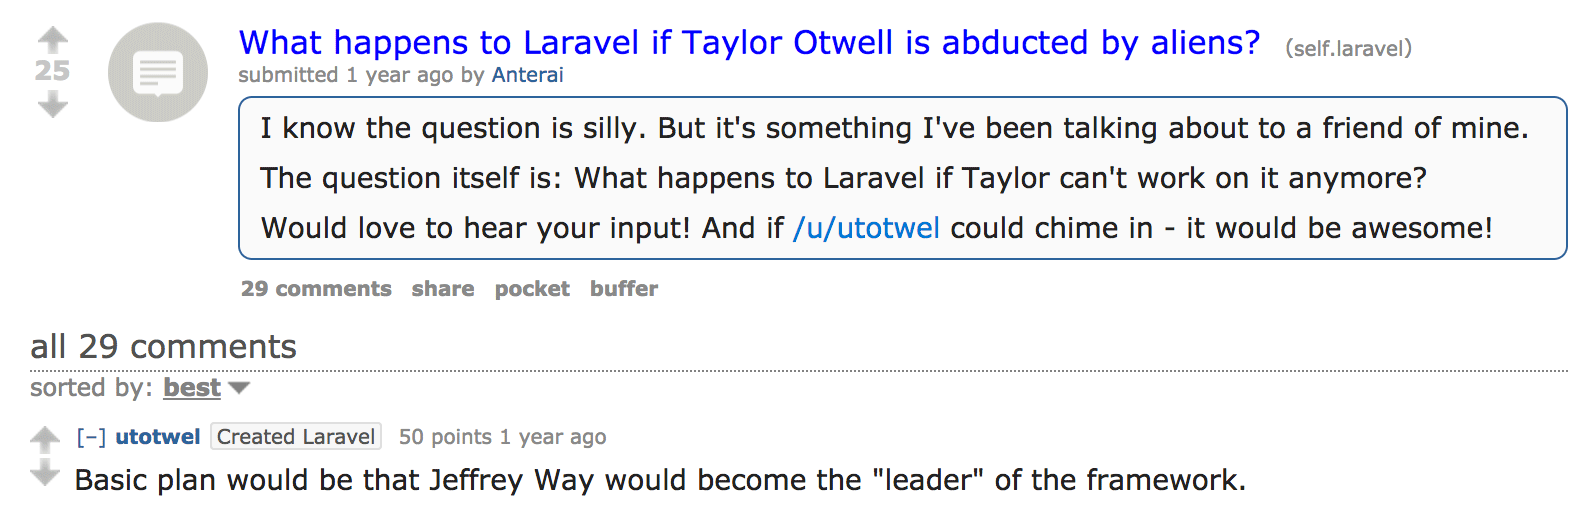 Taylor answering this question on Reddit